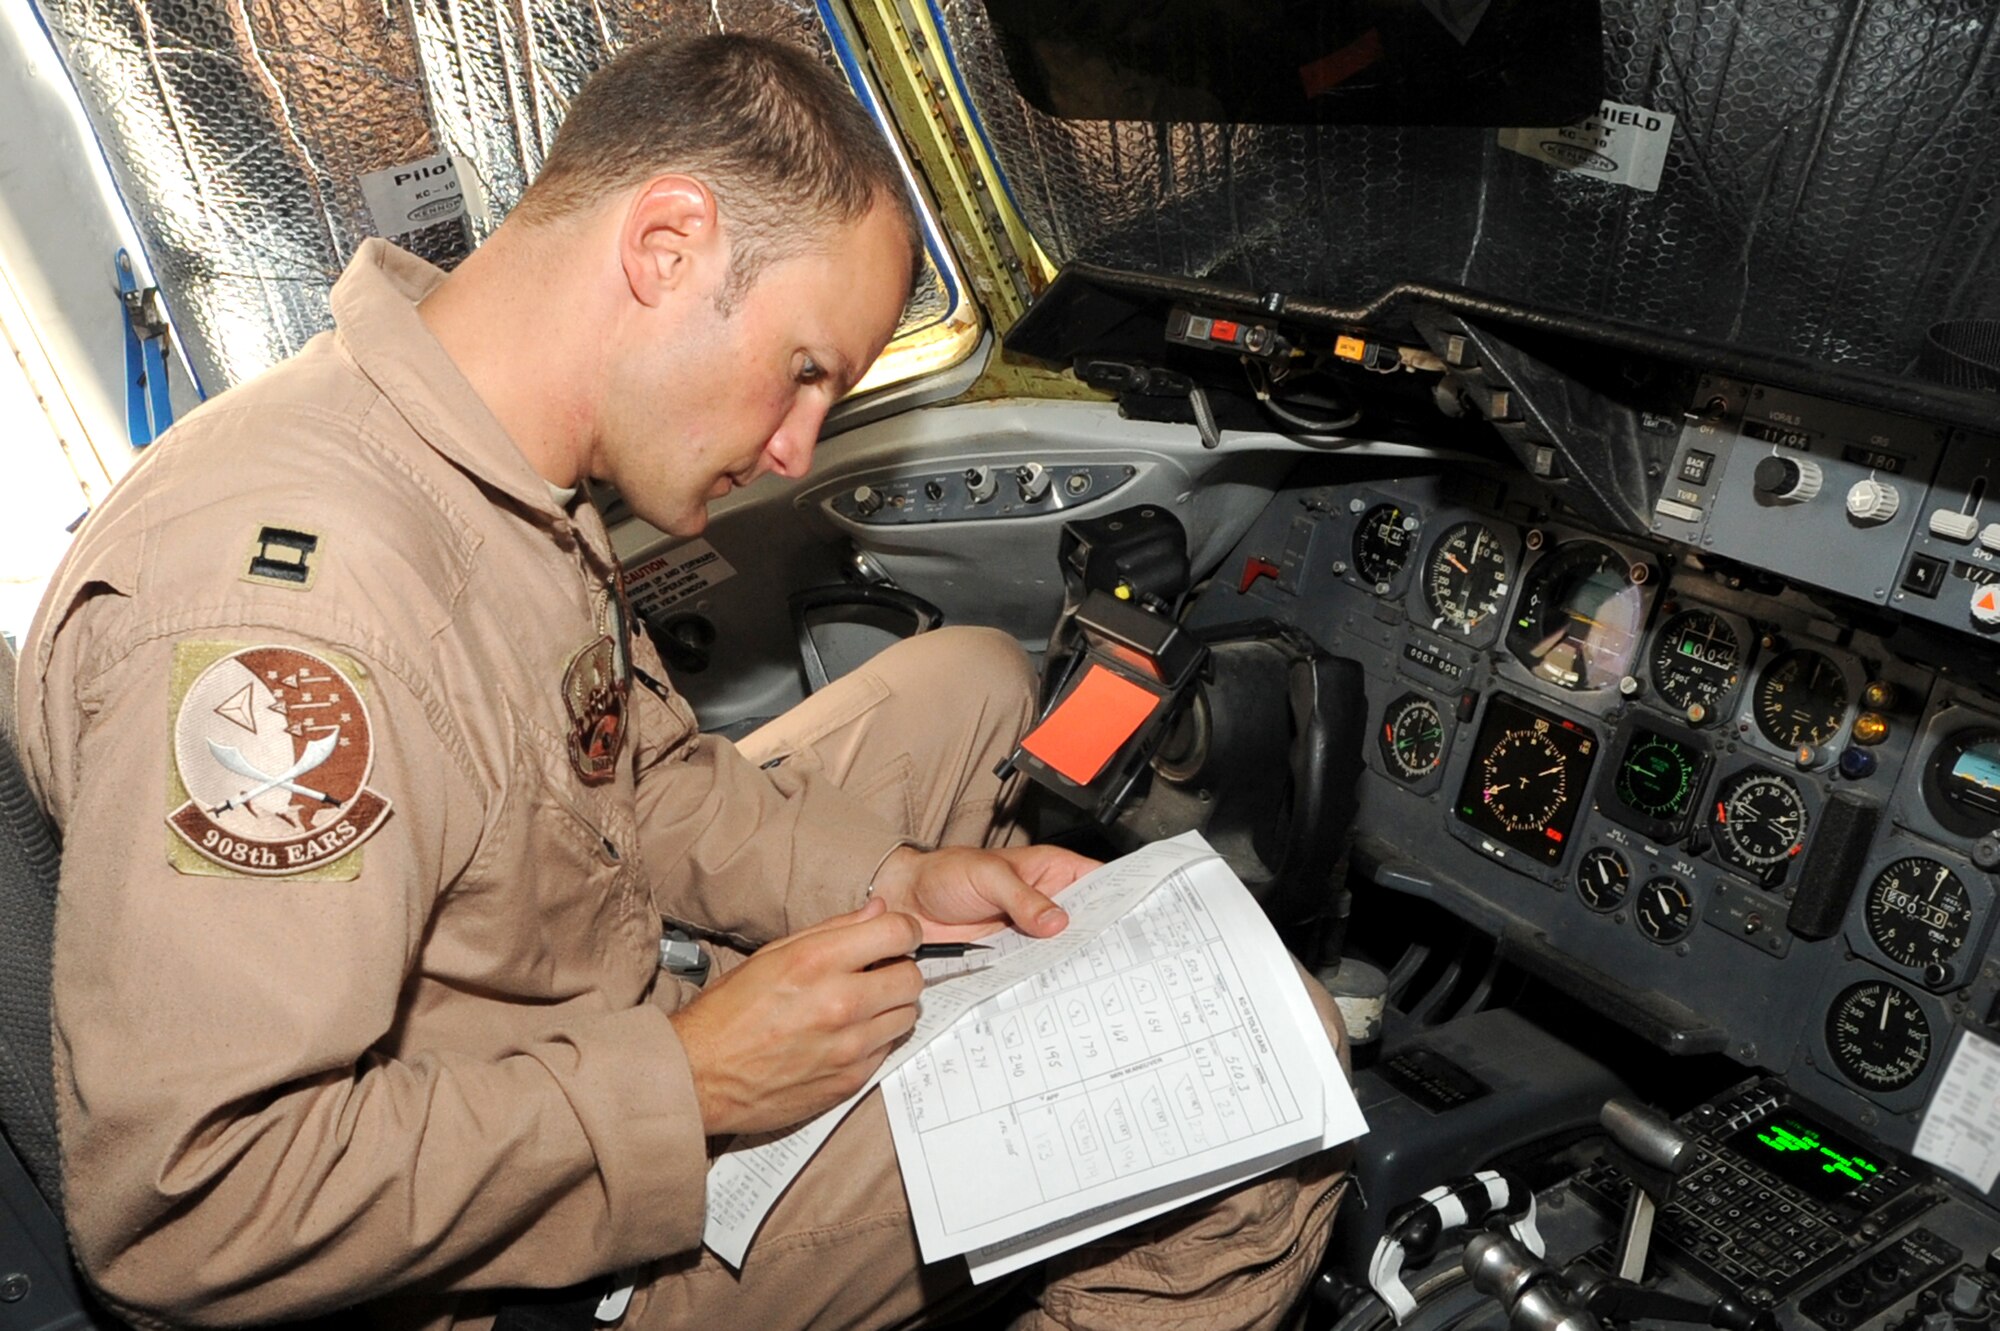 SOUTHWEST ASIA - U.S. Air Force Capt. Vincent Wright, 908th Expeditionary Aerial Refueling Squadron aircraft commander, completes pre-flight paperwork before his mission Sept. 18, 2012. Wright pilots KC-10 Extenders for the 380th Air Expeditionary Wing. (U.S. Air Force photo/Master Sgt. Scott MacKay)